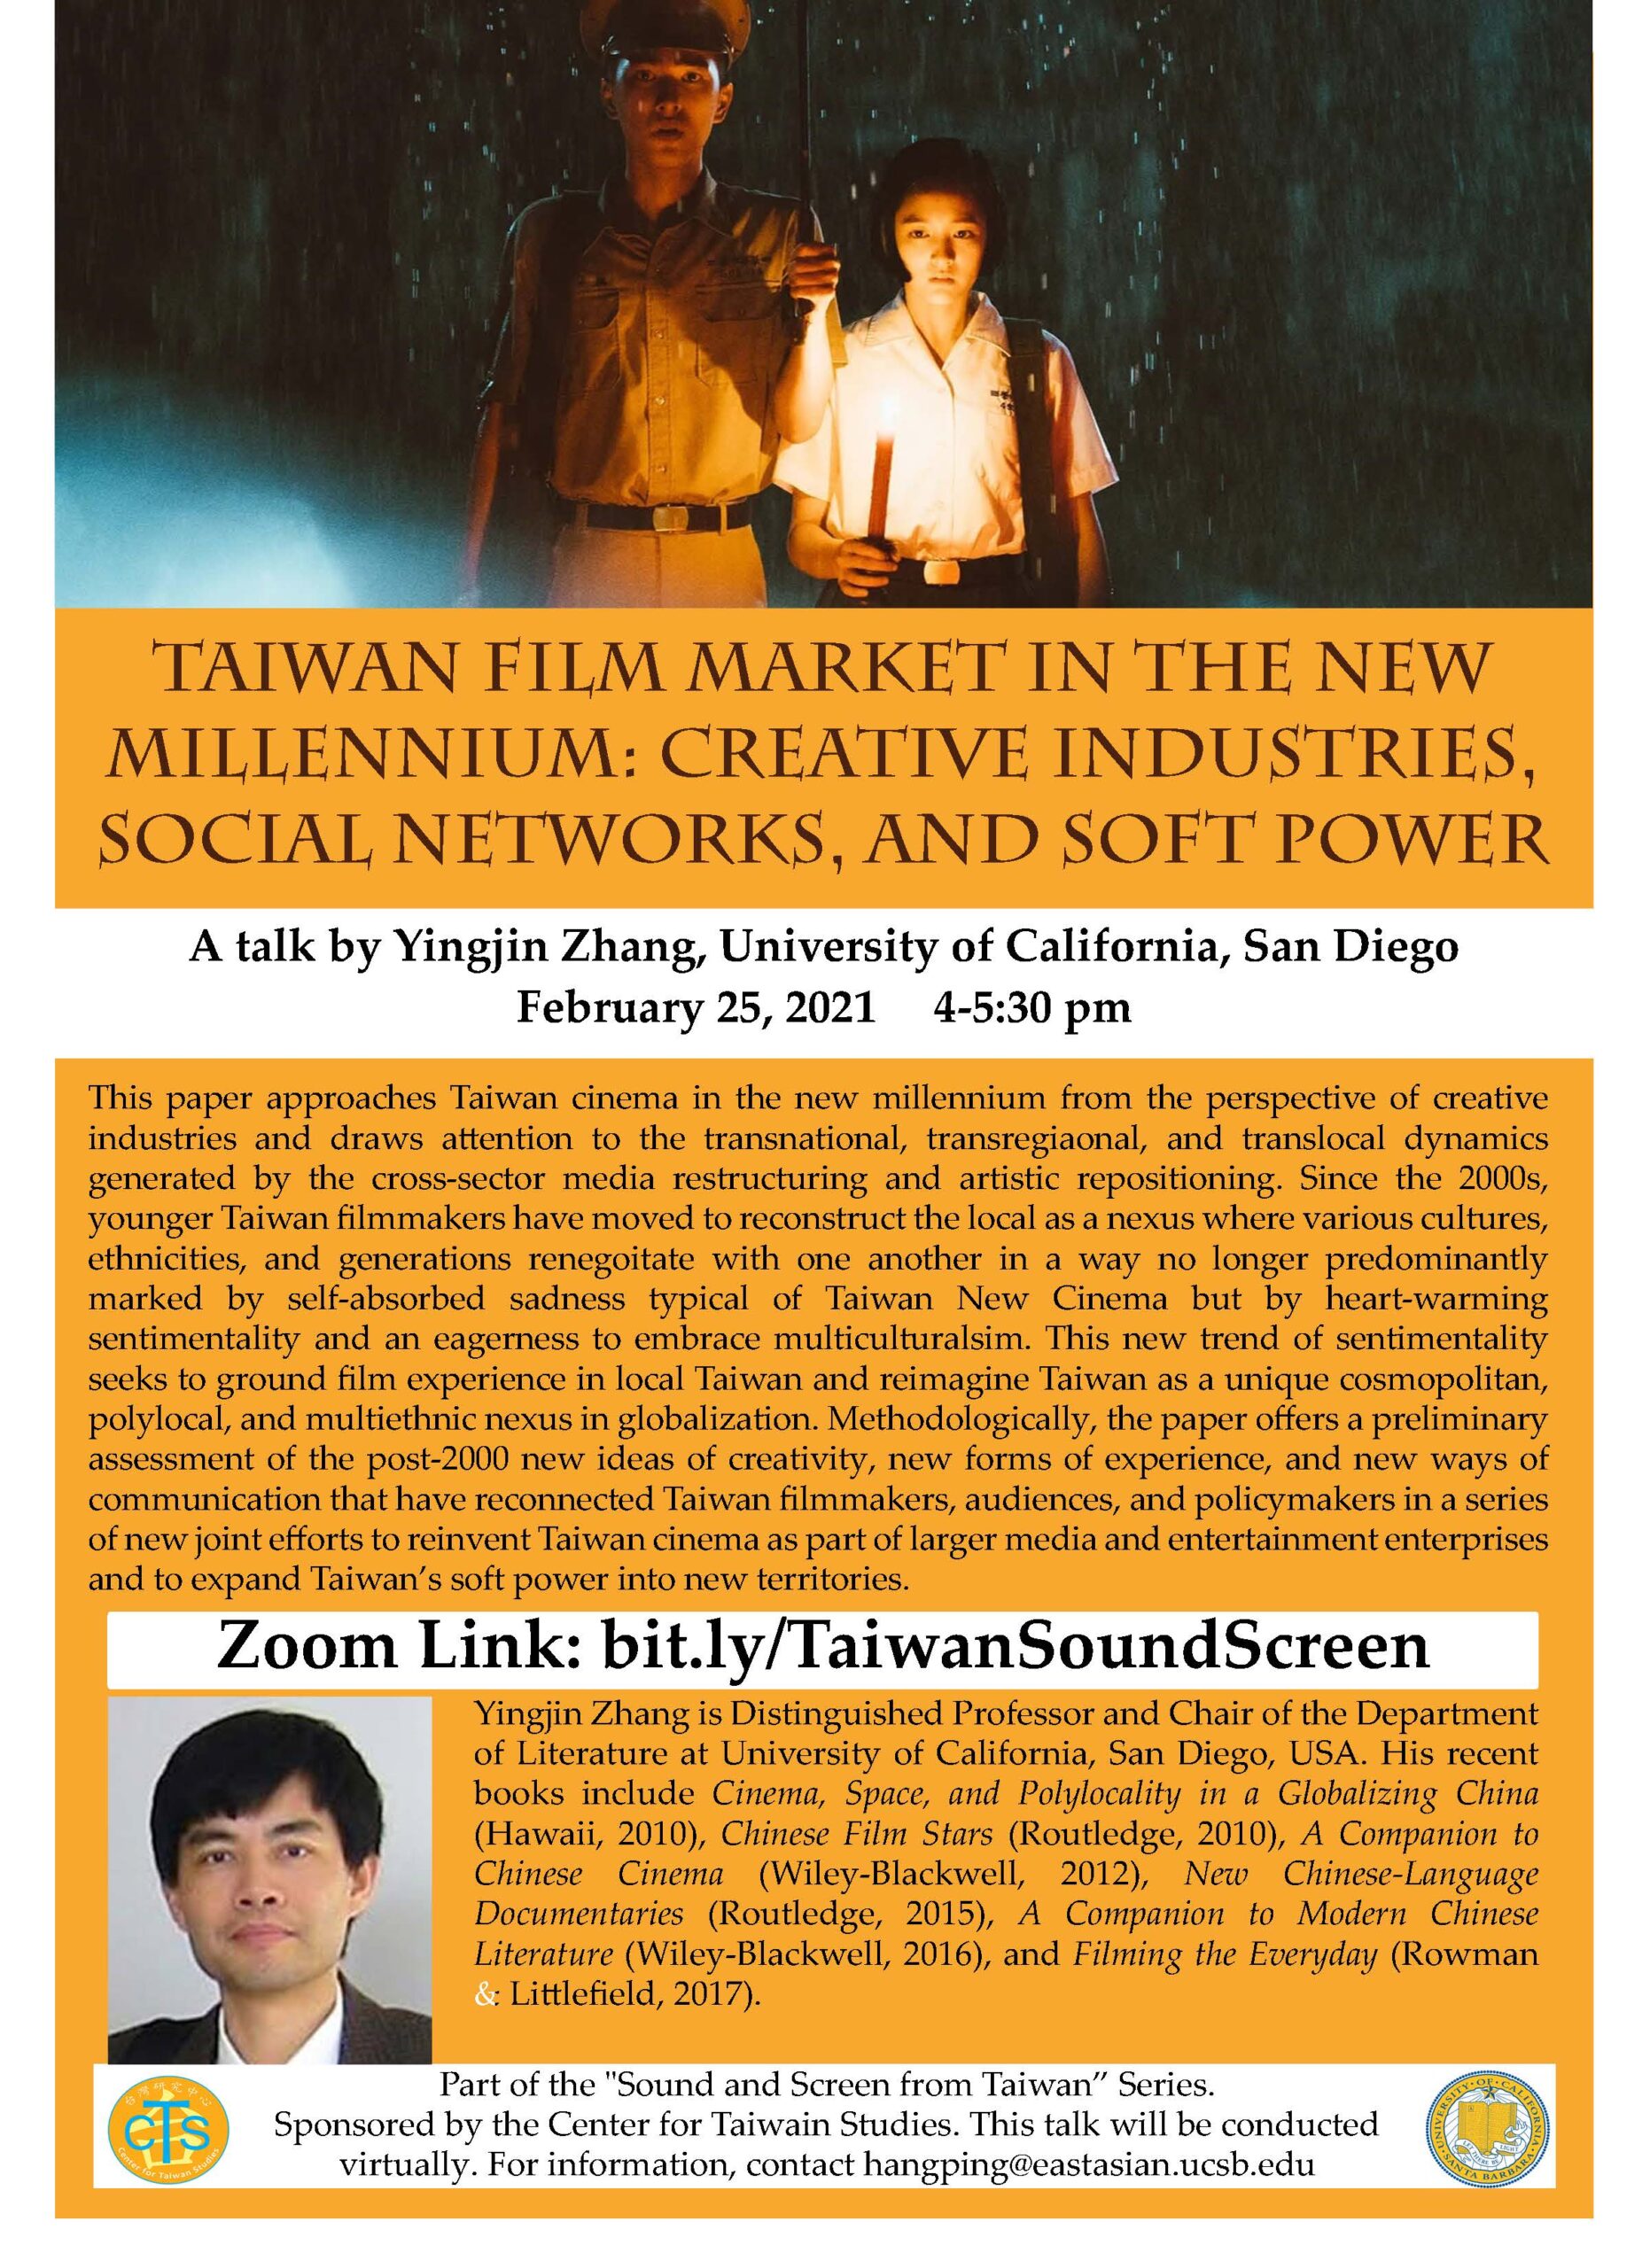 Flyer for "Taiwan Film Market in the New Millennium: Creative Industries, Social Networks, and Soft Power" by Yingjin Zhang at UCSD on 2/25/21 at 4-5:30PM